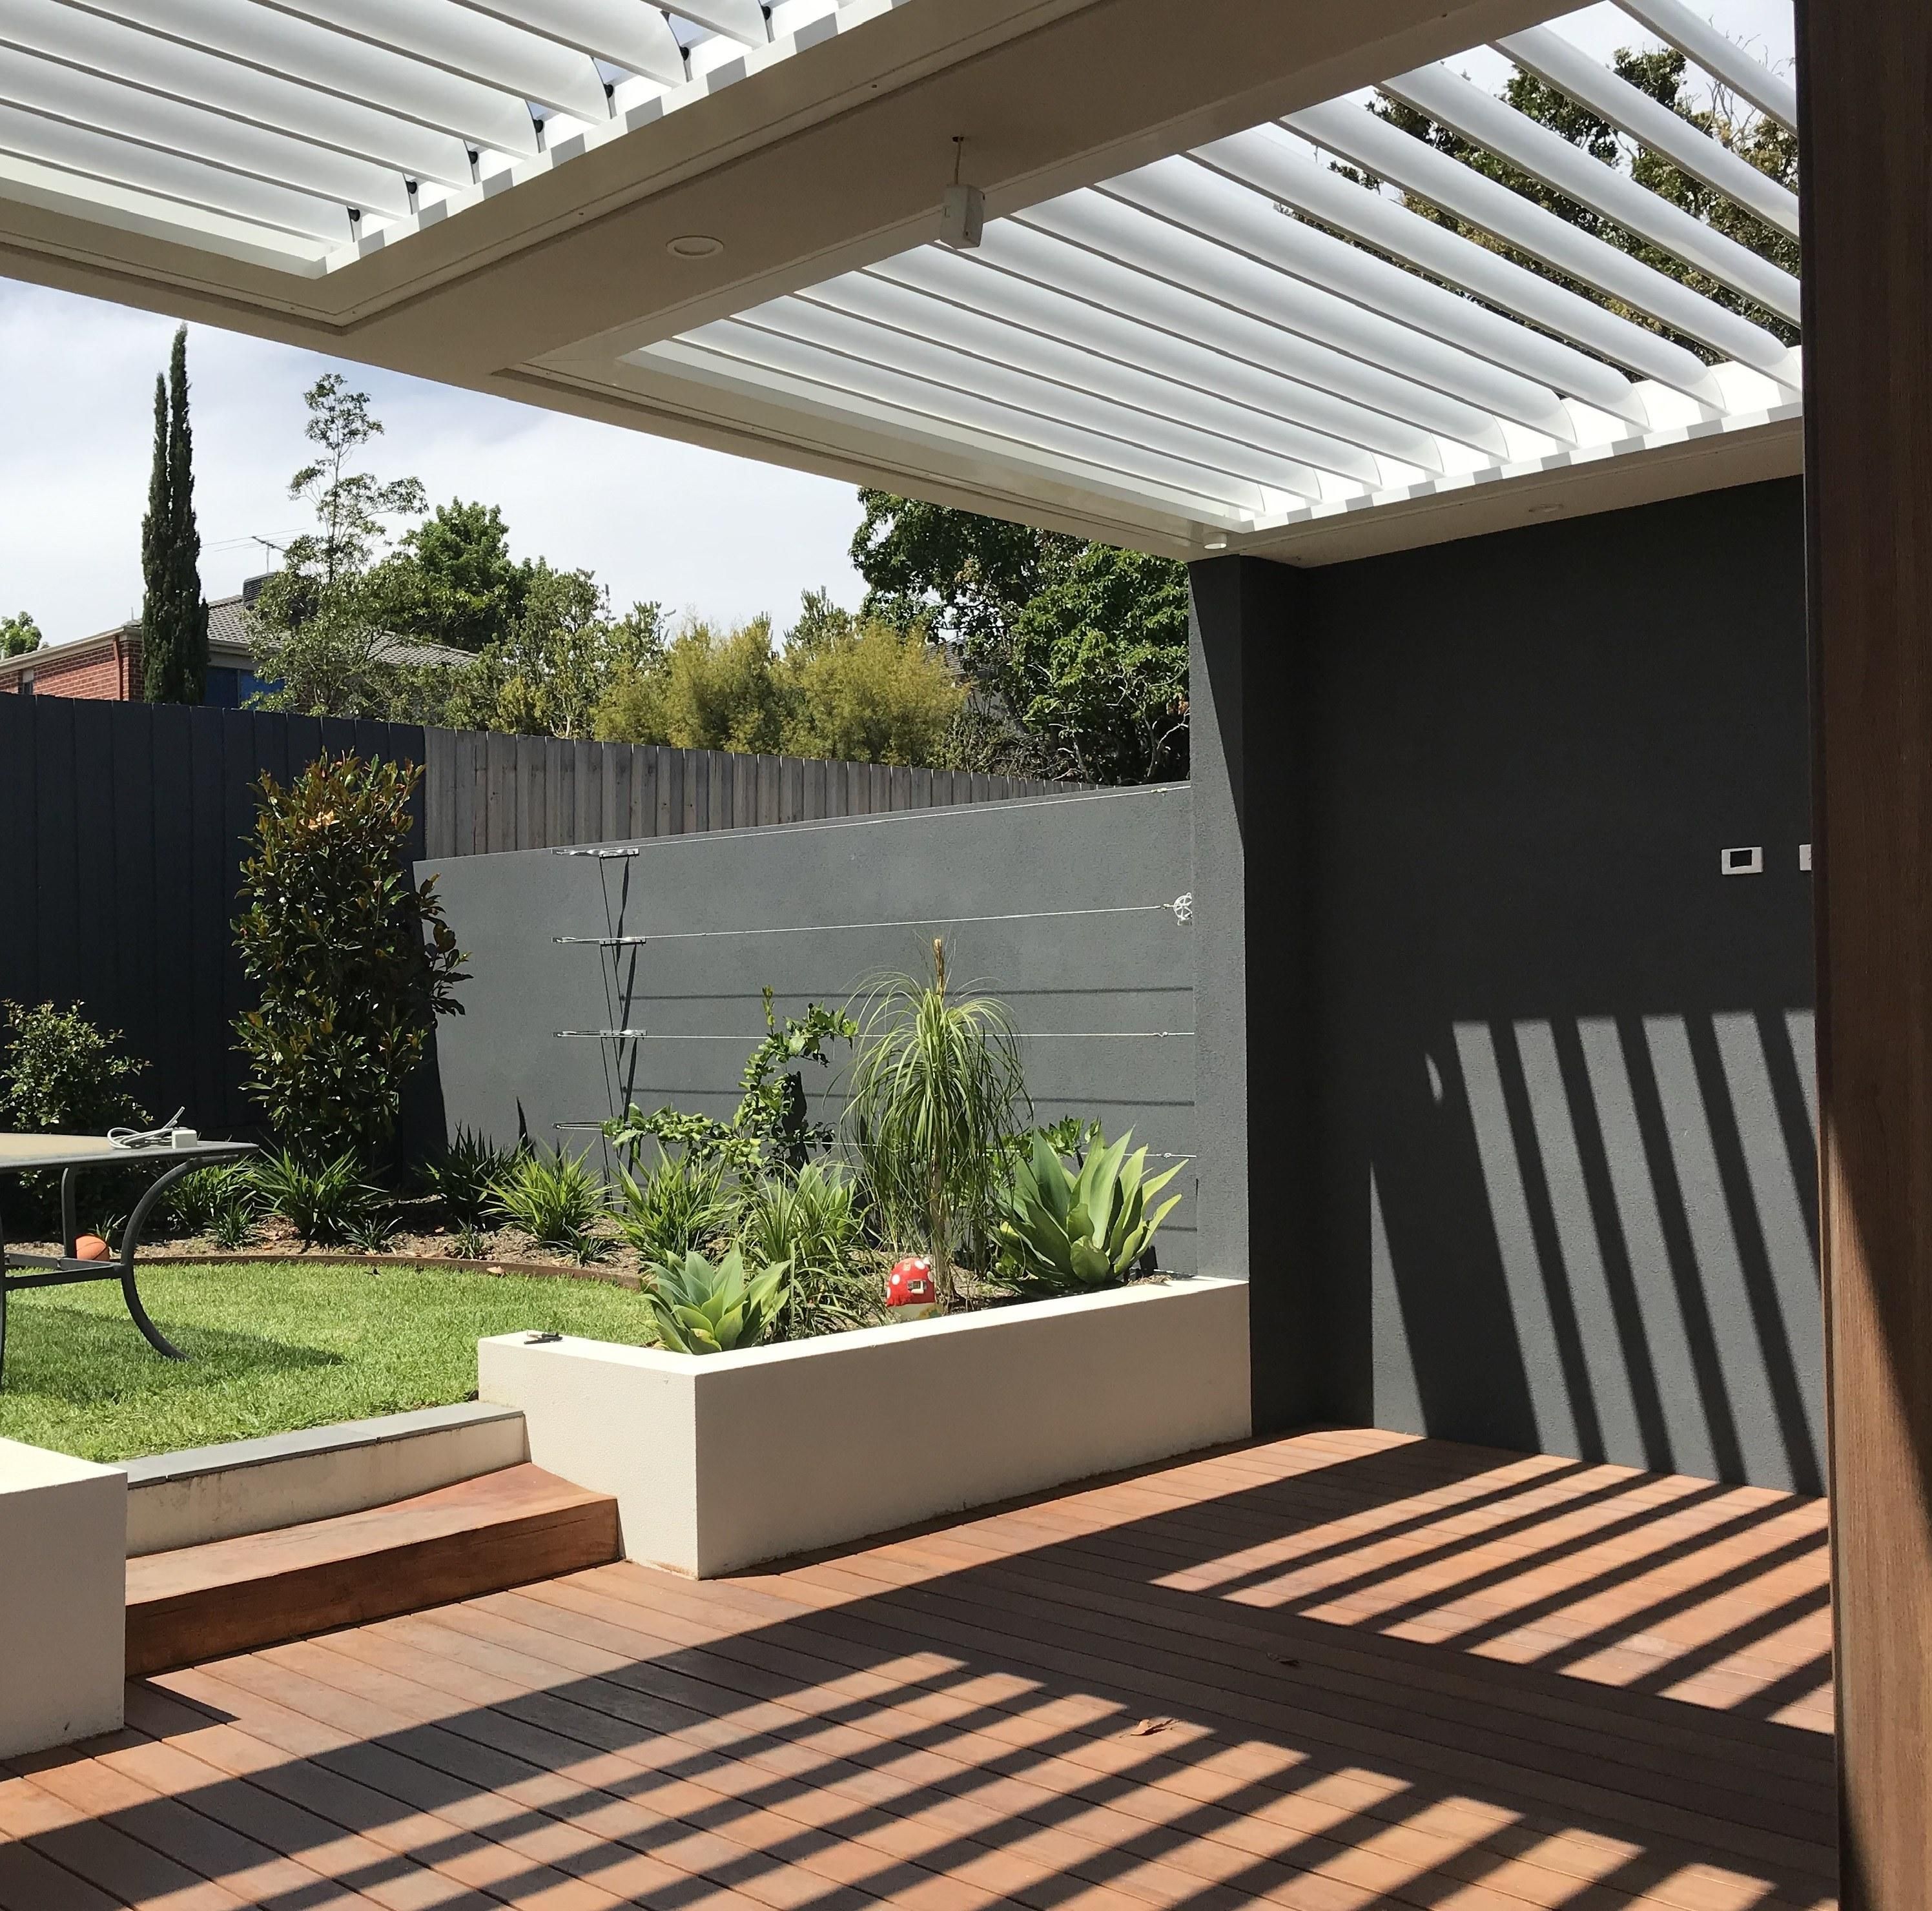 Sunlite Louvre roof installed on a deck of a house in Melbourne